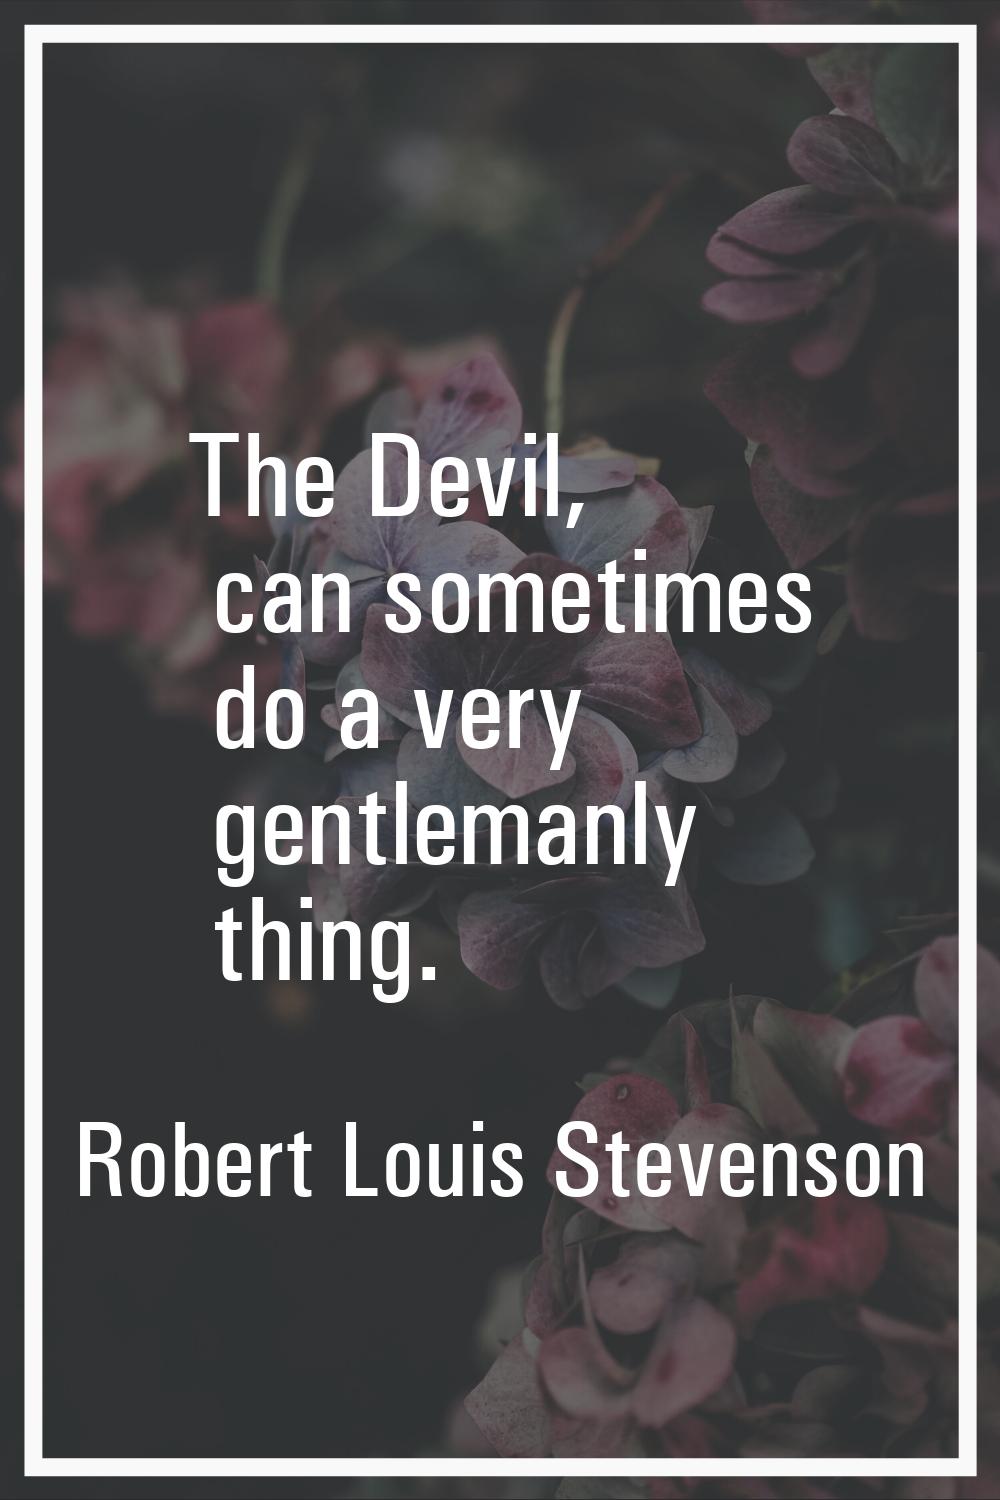 The Devil, can sometimes do a very gentlemanly thing.